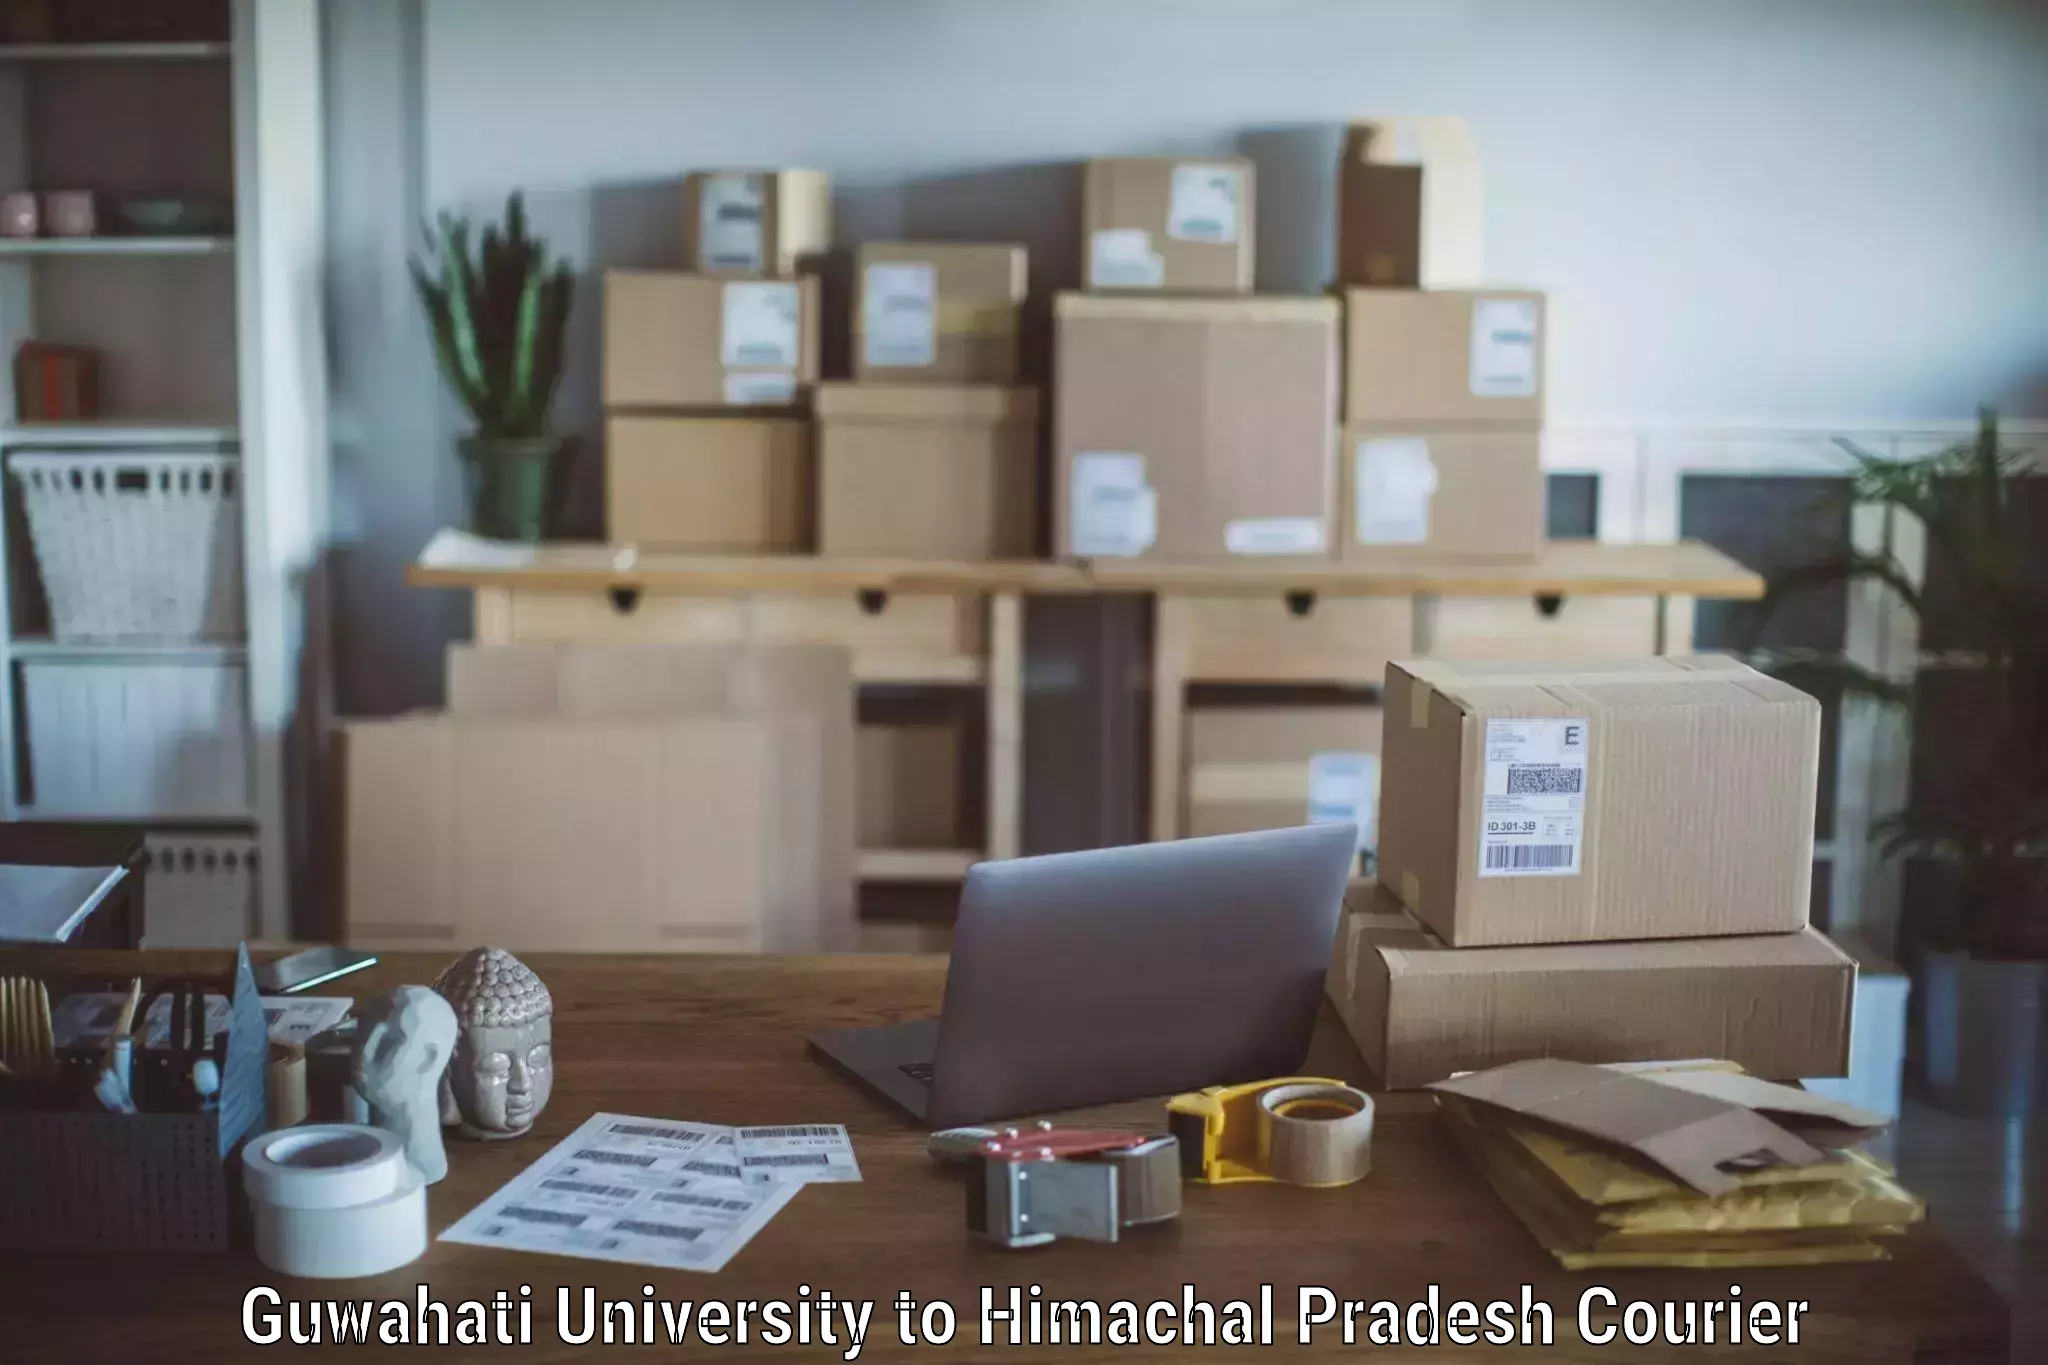 Moving and storage services in Guwahati University to YS Parmar University of Horticulture and Forestry Solan